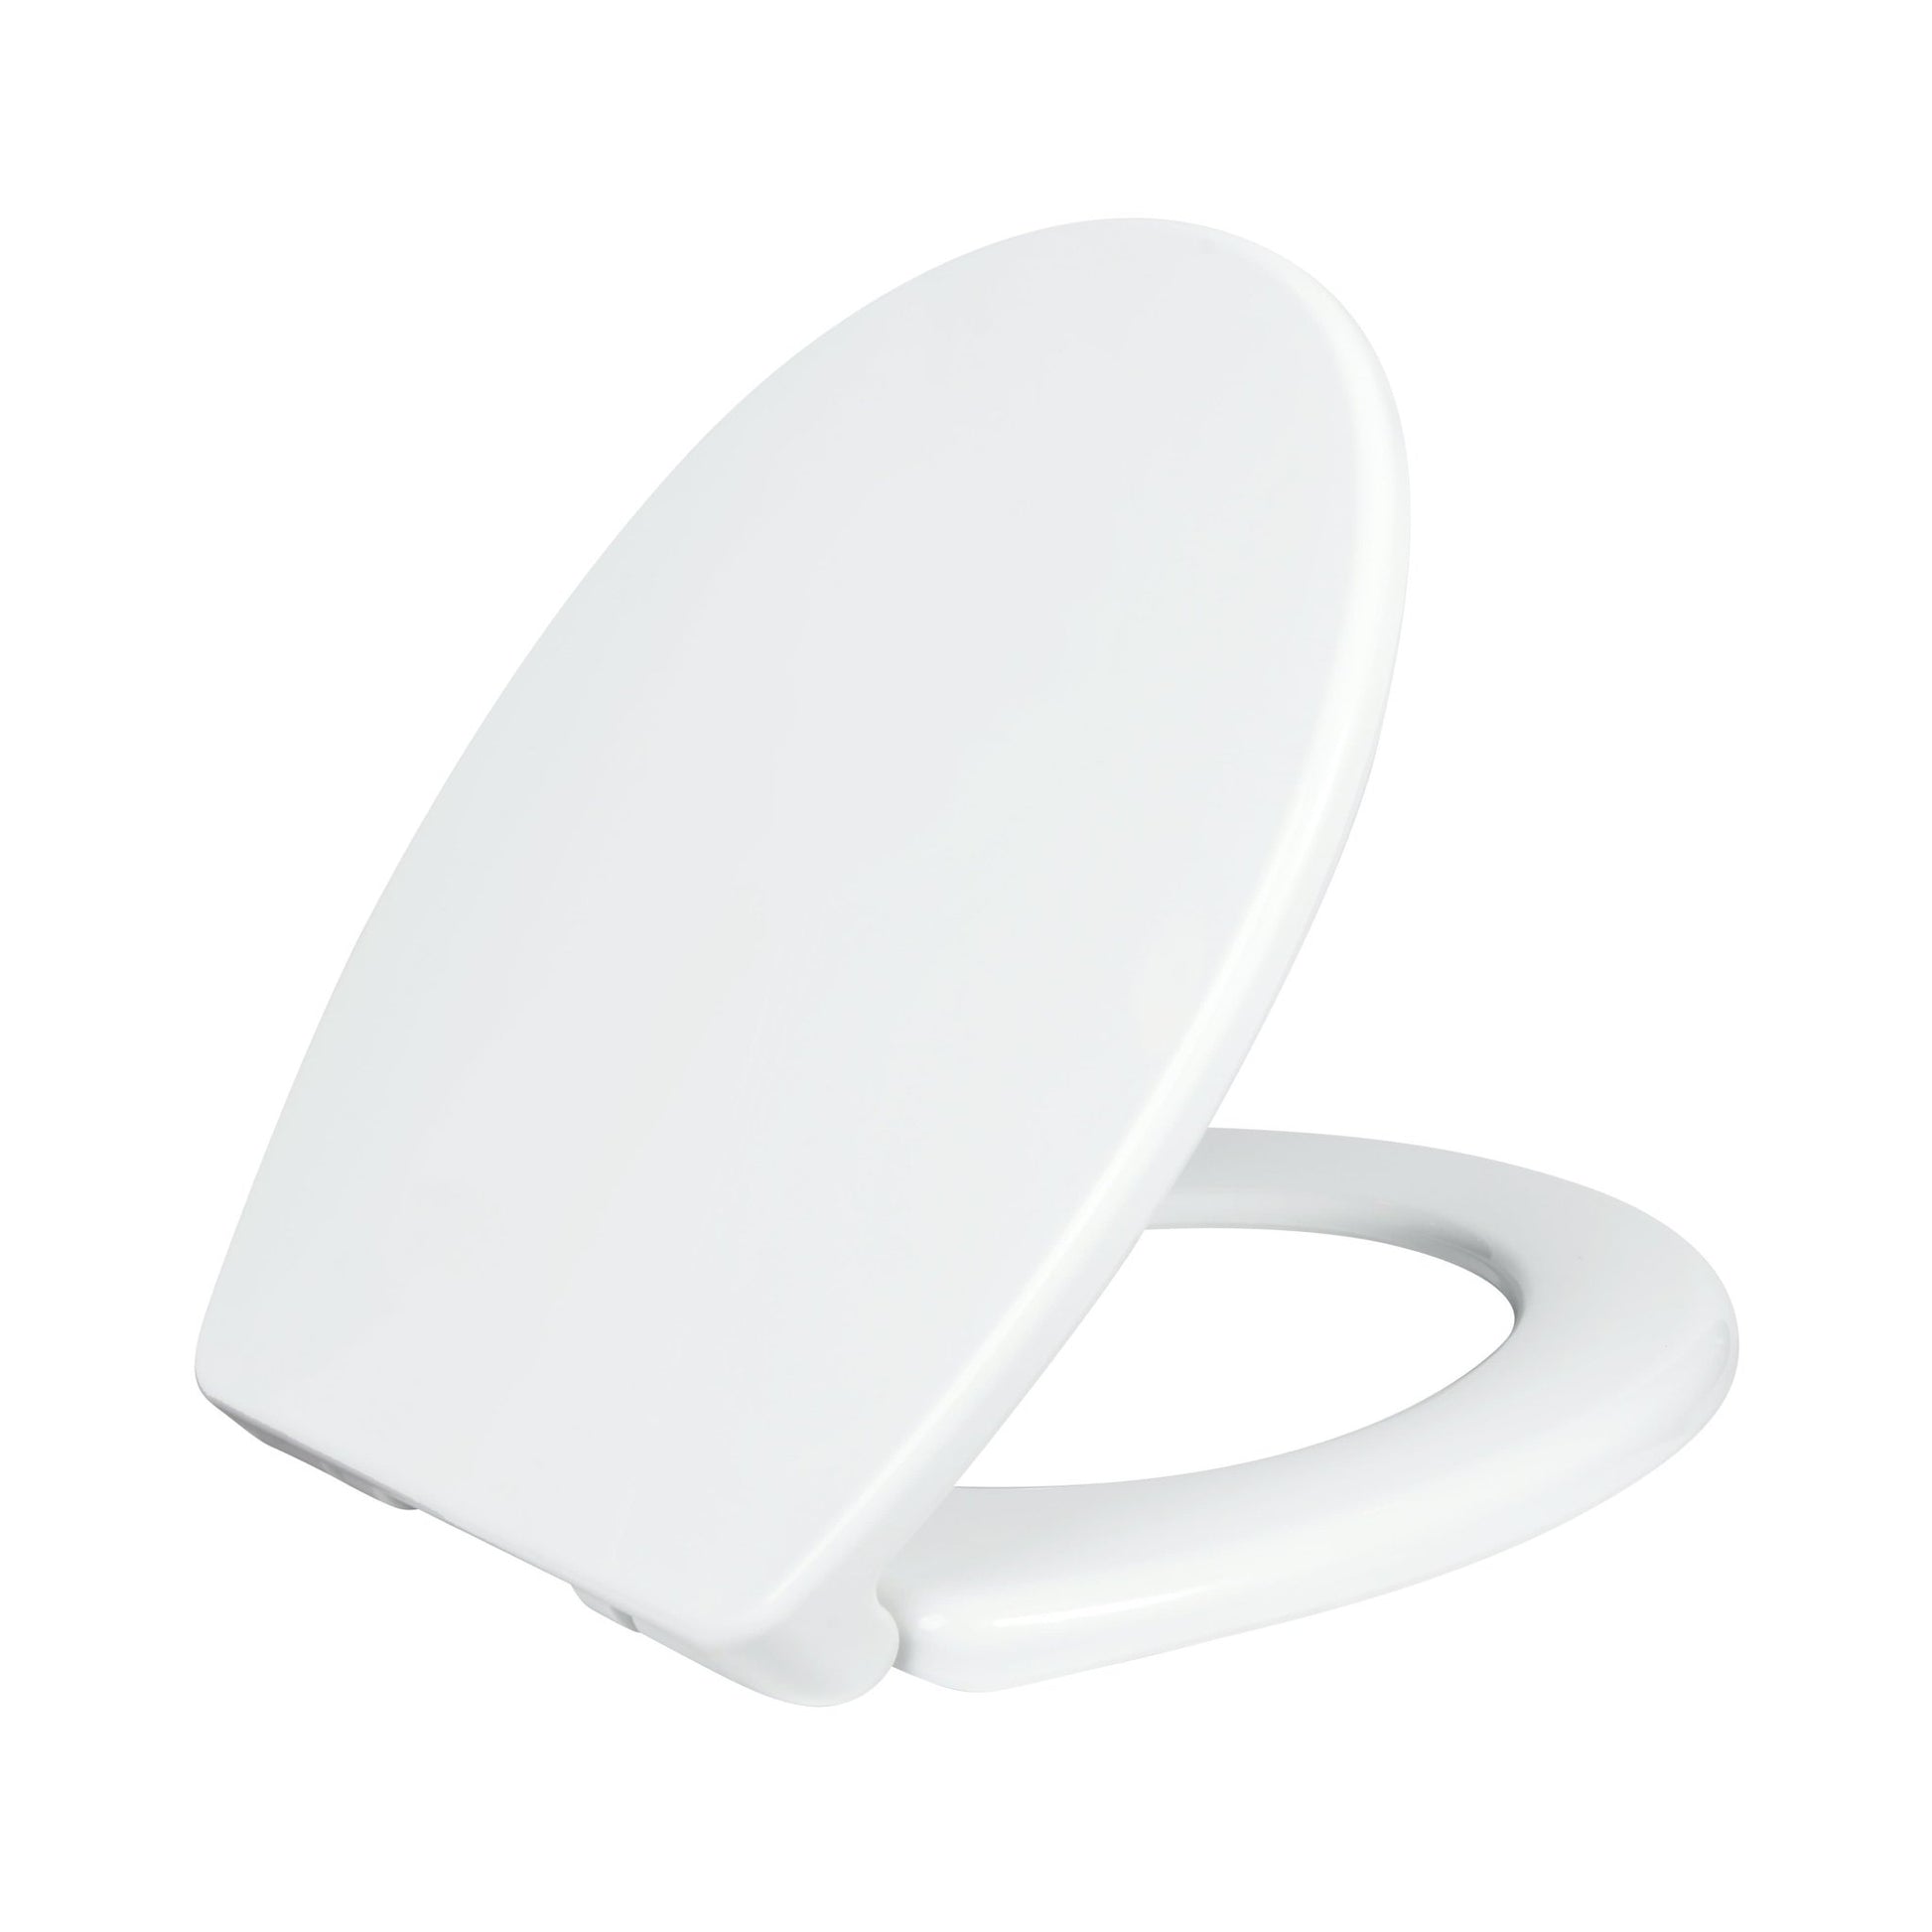 LUXE Comfort Fit Toilet Seat - Round